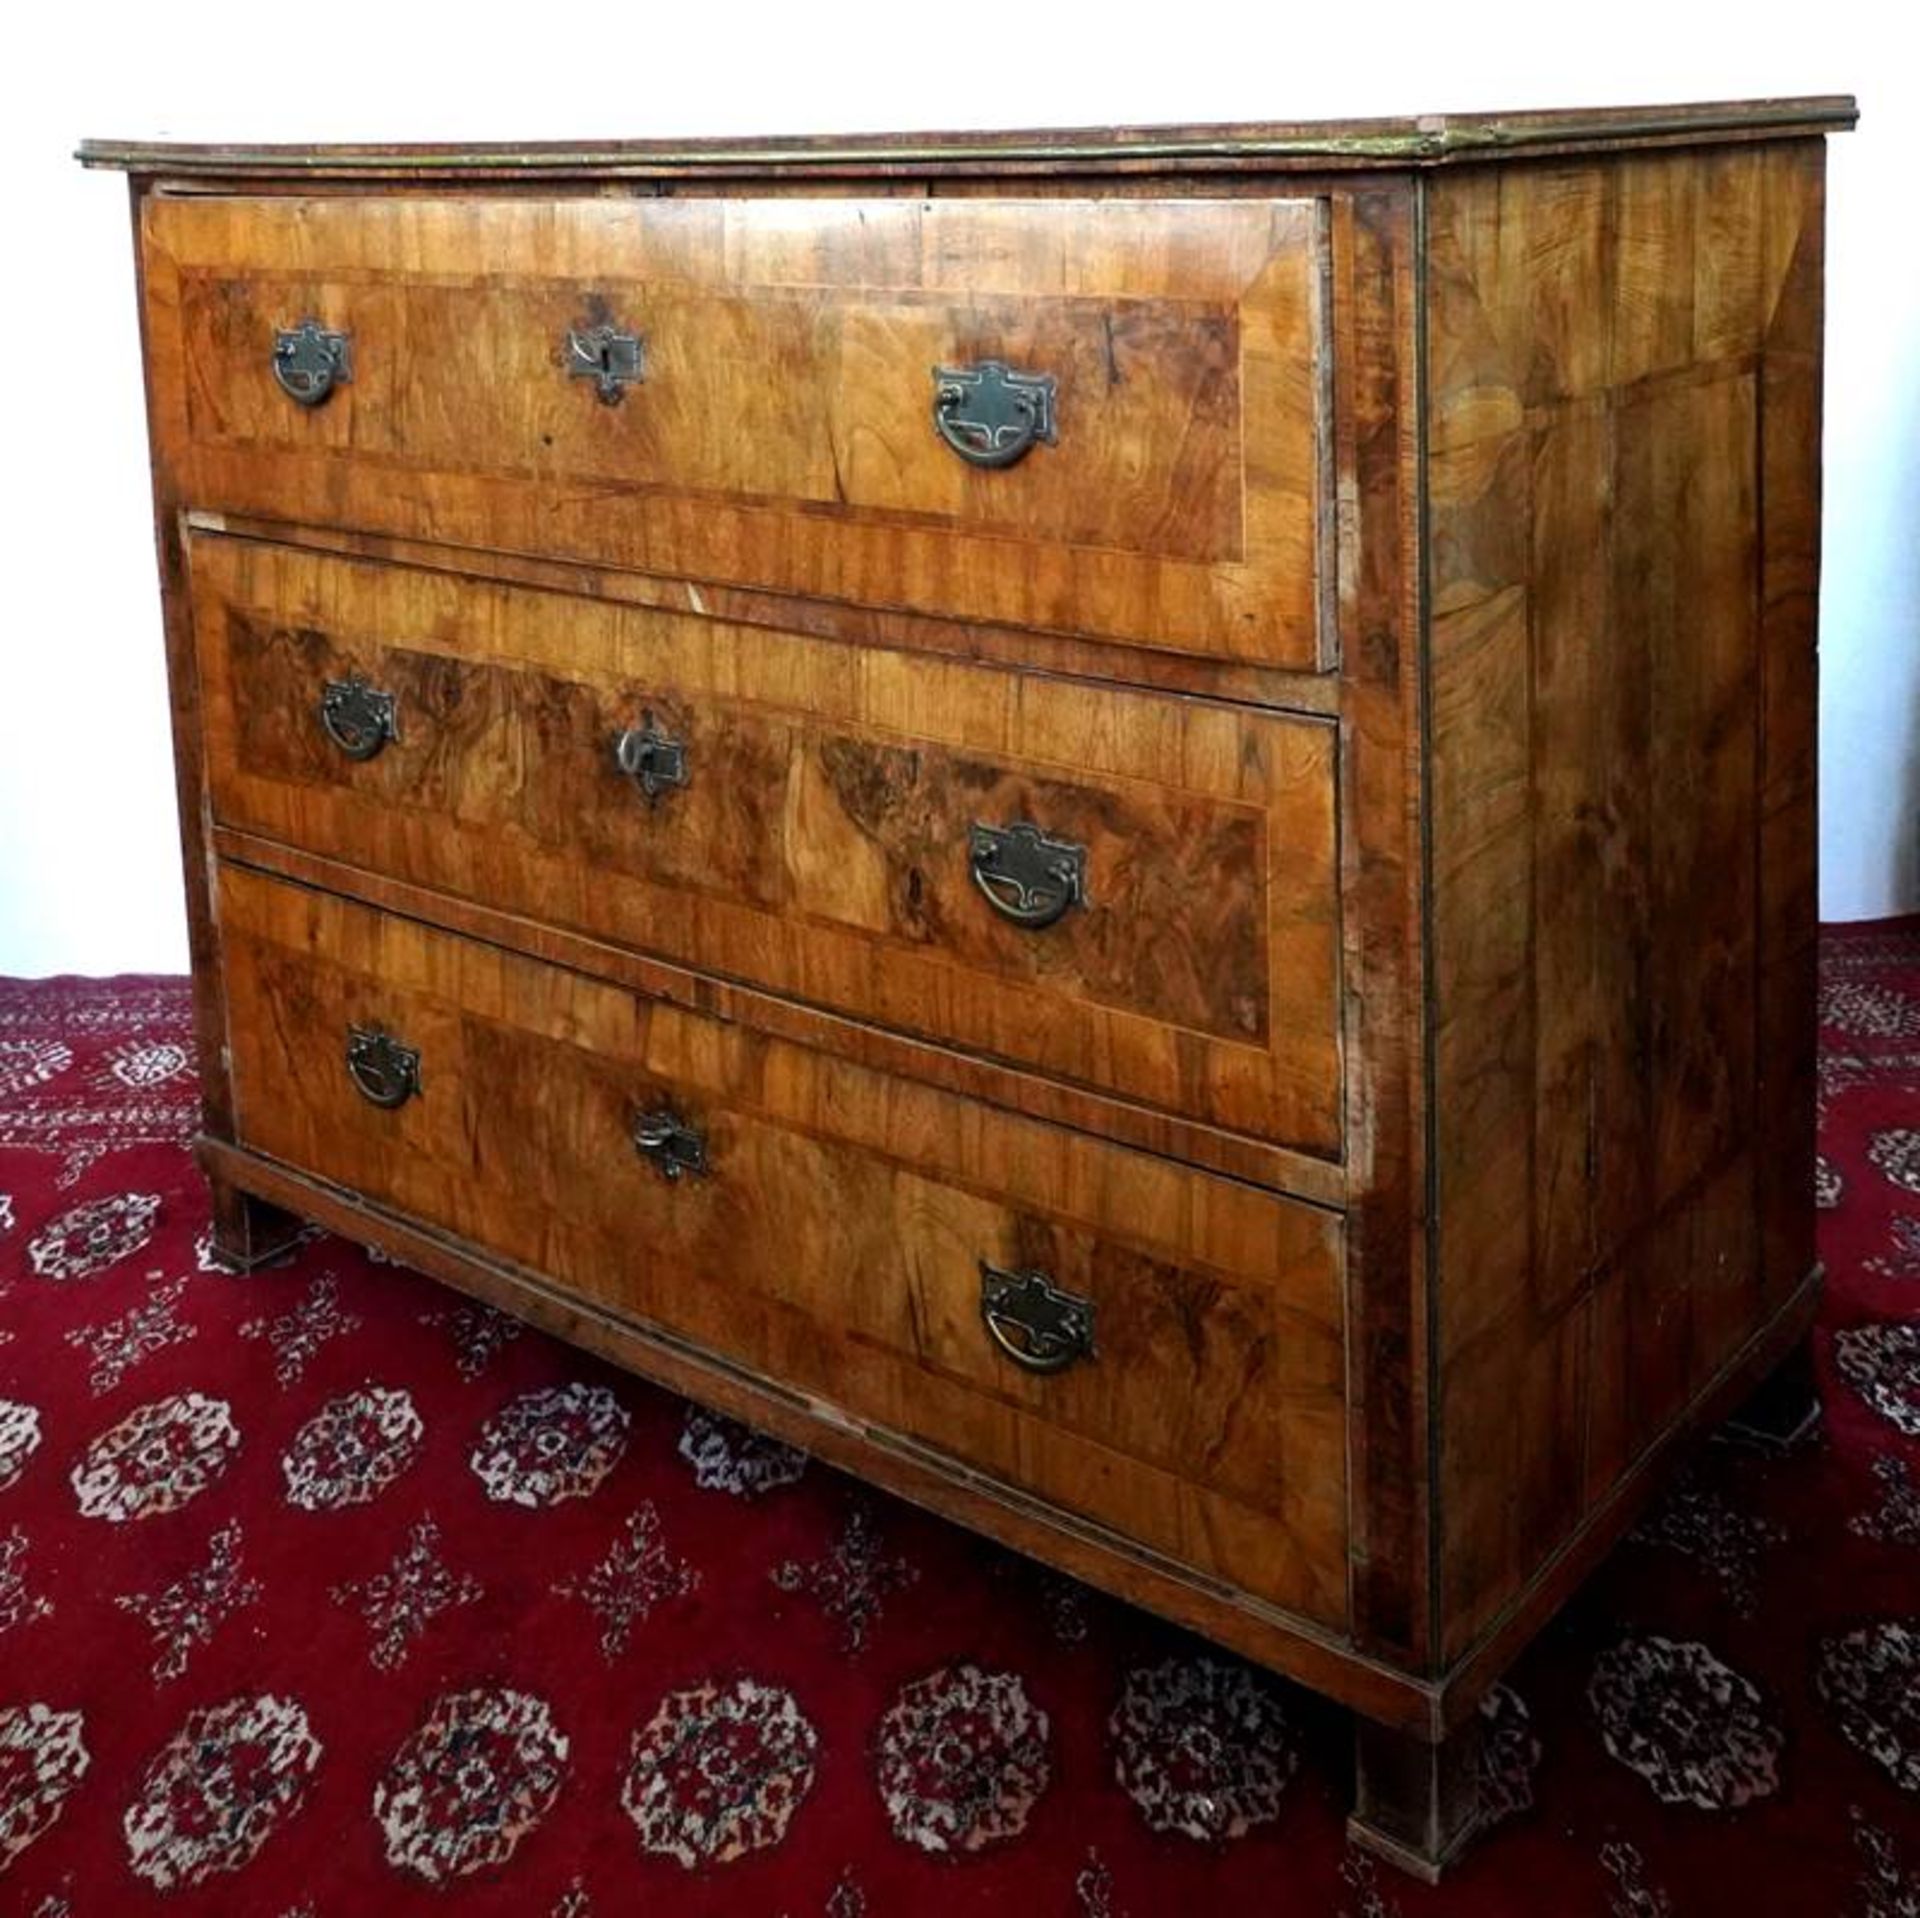 Louis-Seize chest of drawers - Image 4 of 6